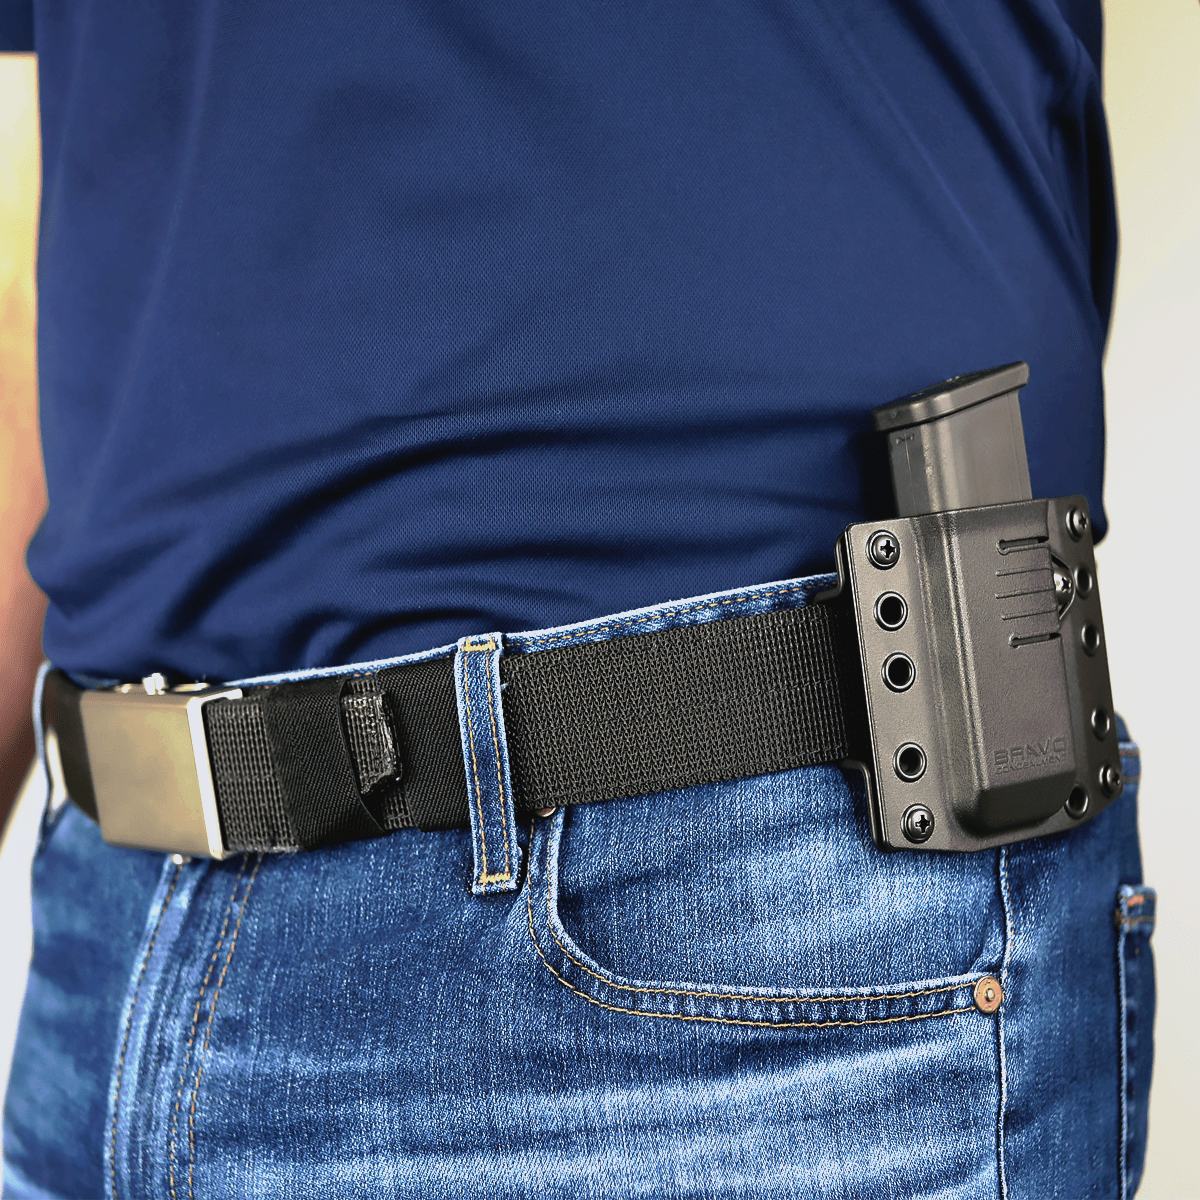  Holster for Glock 19/17 with Streamlight TLR-1 HL - OWB Holster  for Concealed Carry/Bravo Concealment : Sports & Outdoors